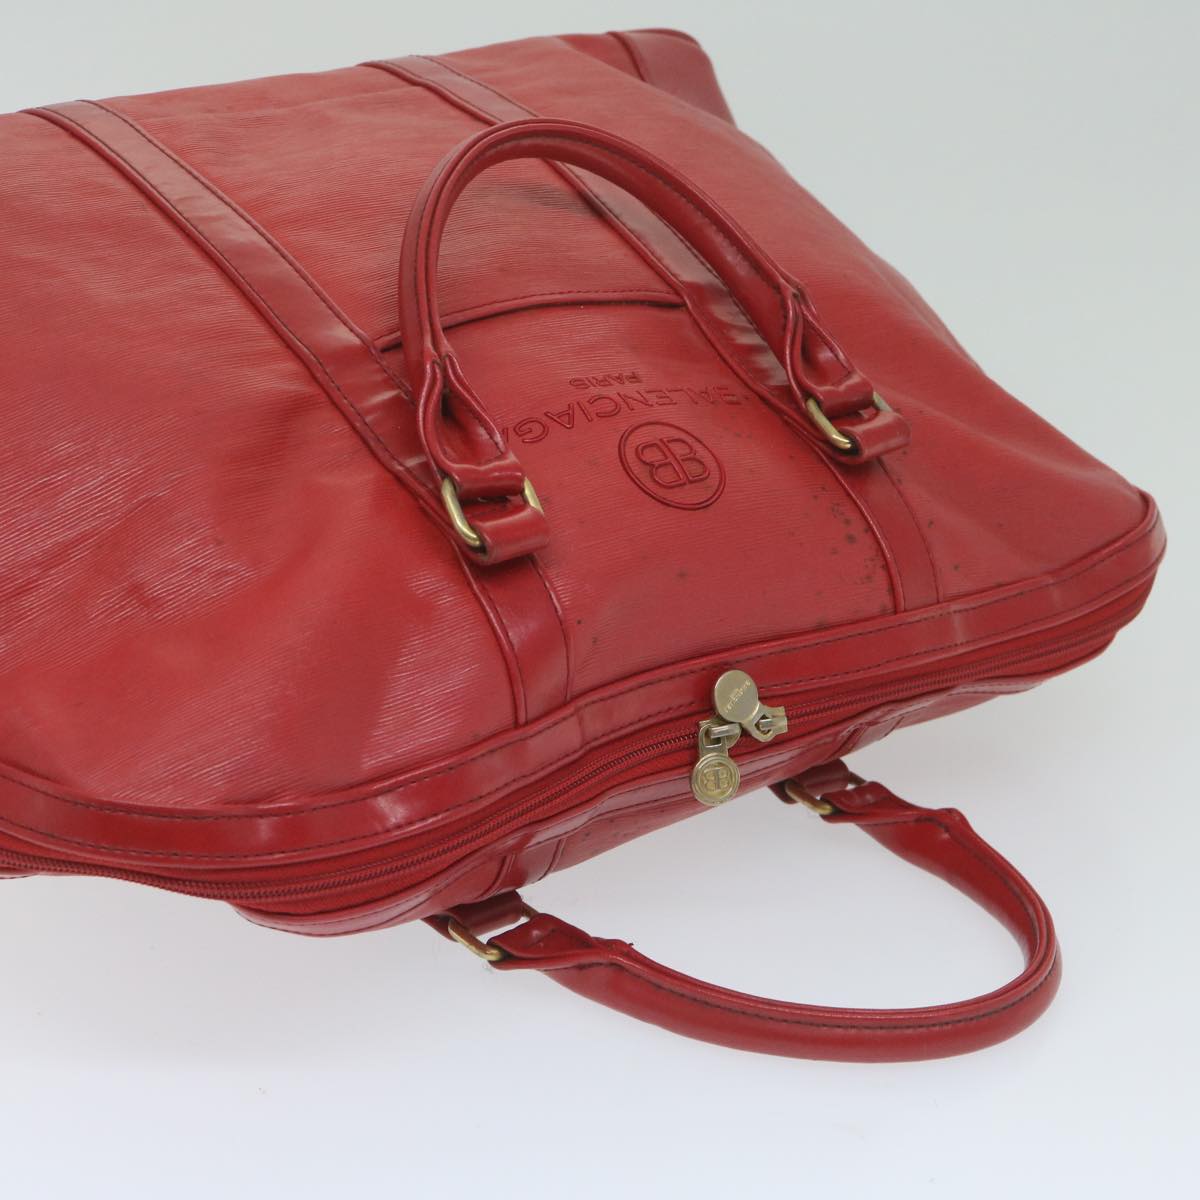 BALENCIAGA Boston Bag Patent leather Red Auth bs11406